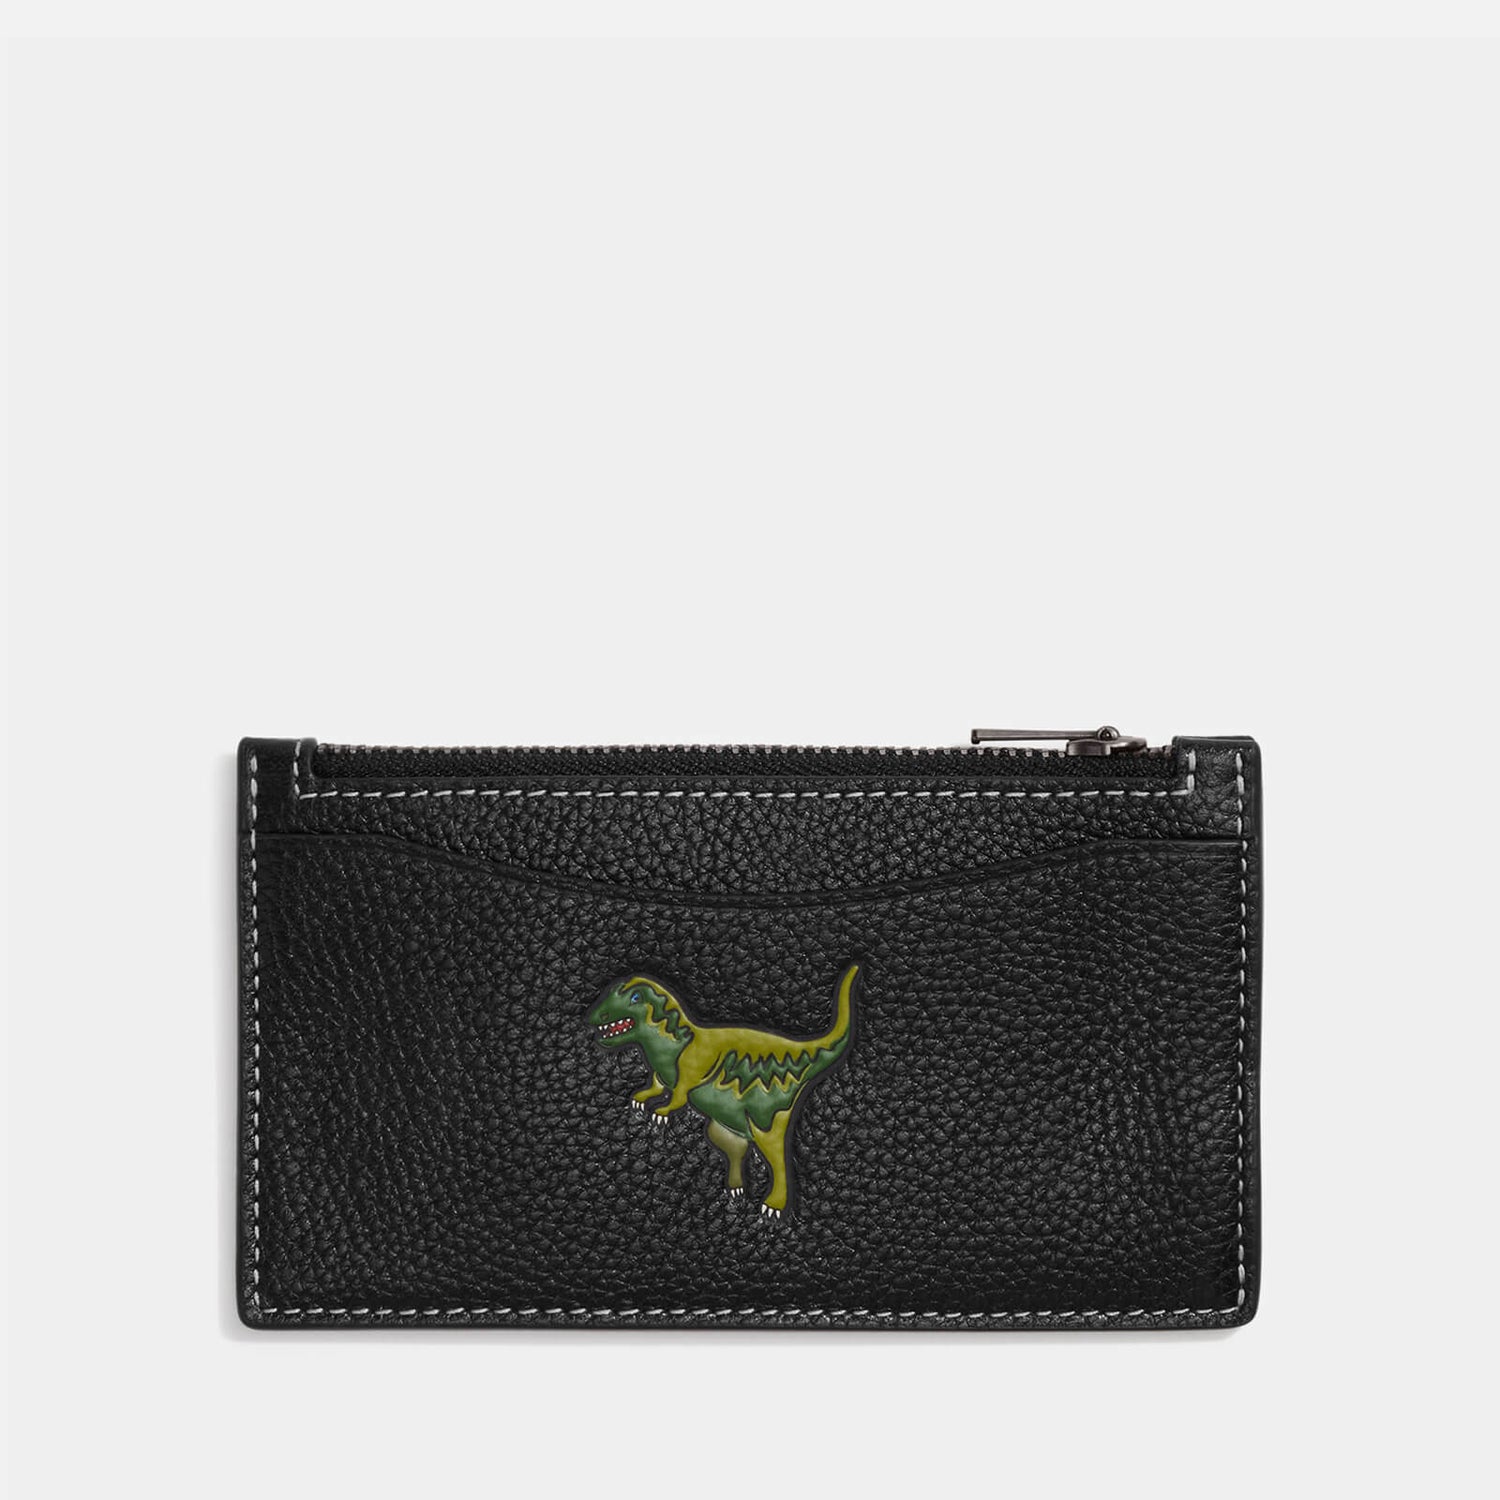 Coach Rexy Zipped Peddled Leather Cardholder